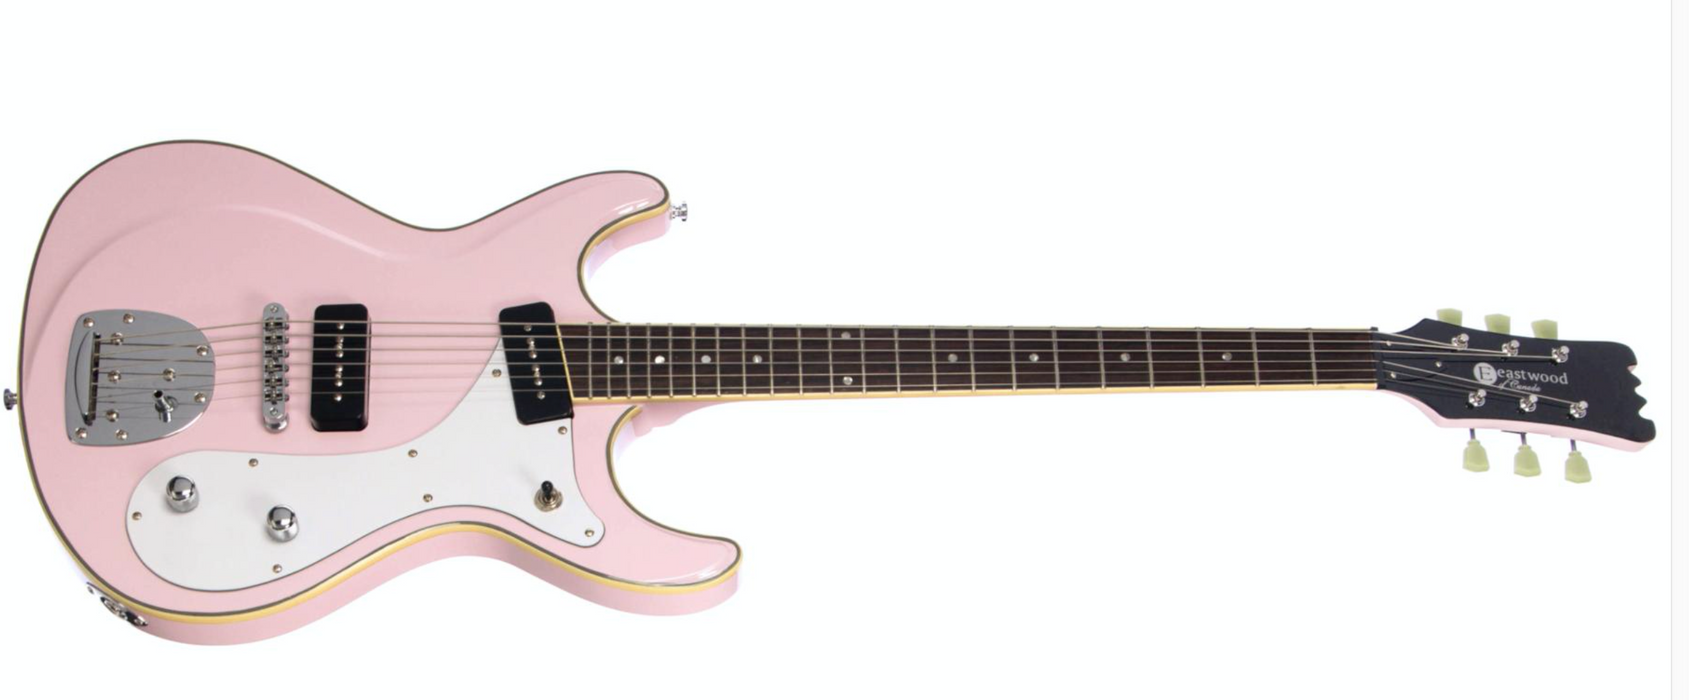 Eastwood Sidejack Deluxe Baritone Electric Guitar -Shell Pink